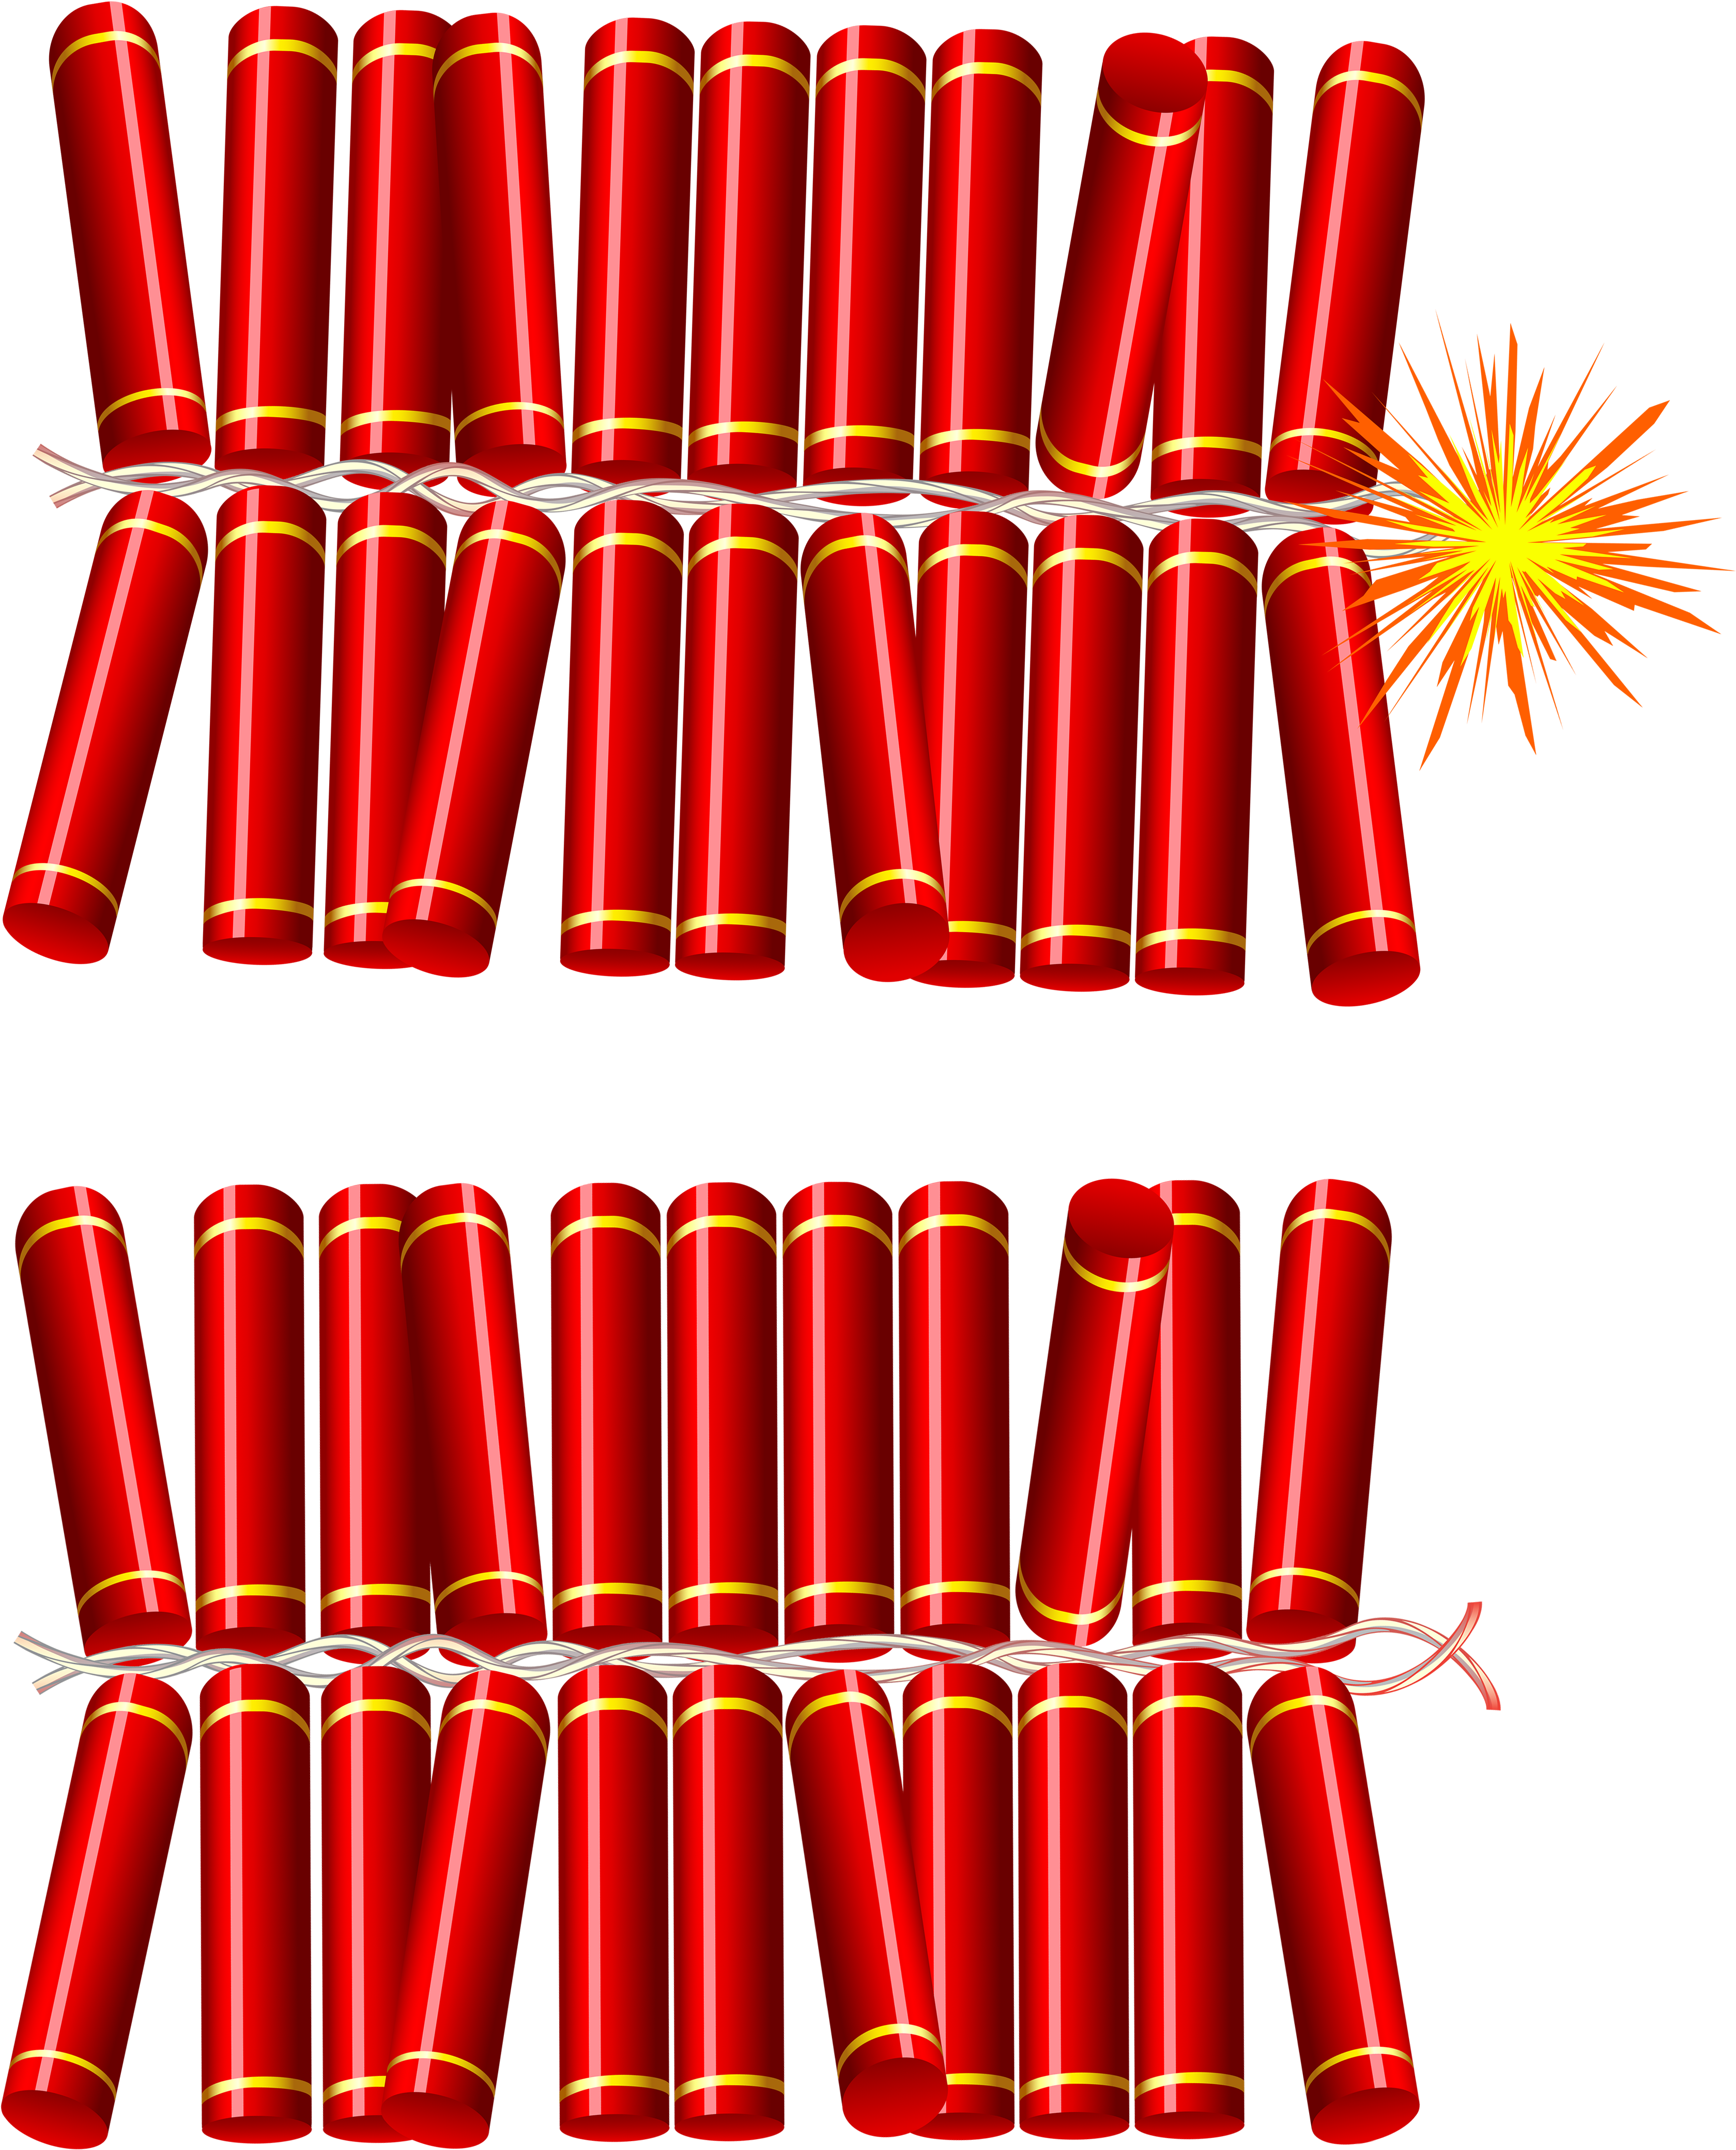 Red Firecrackers Ignition Illustration